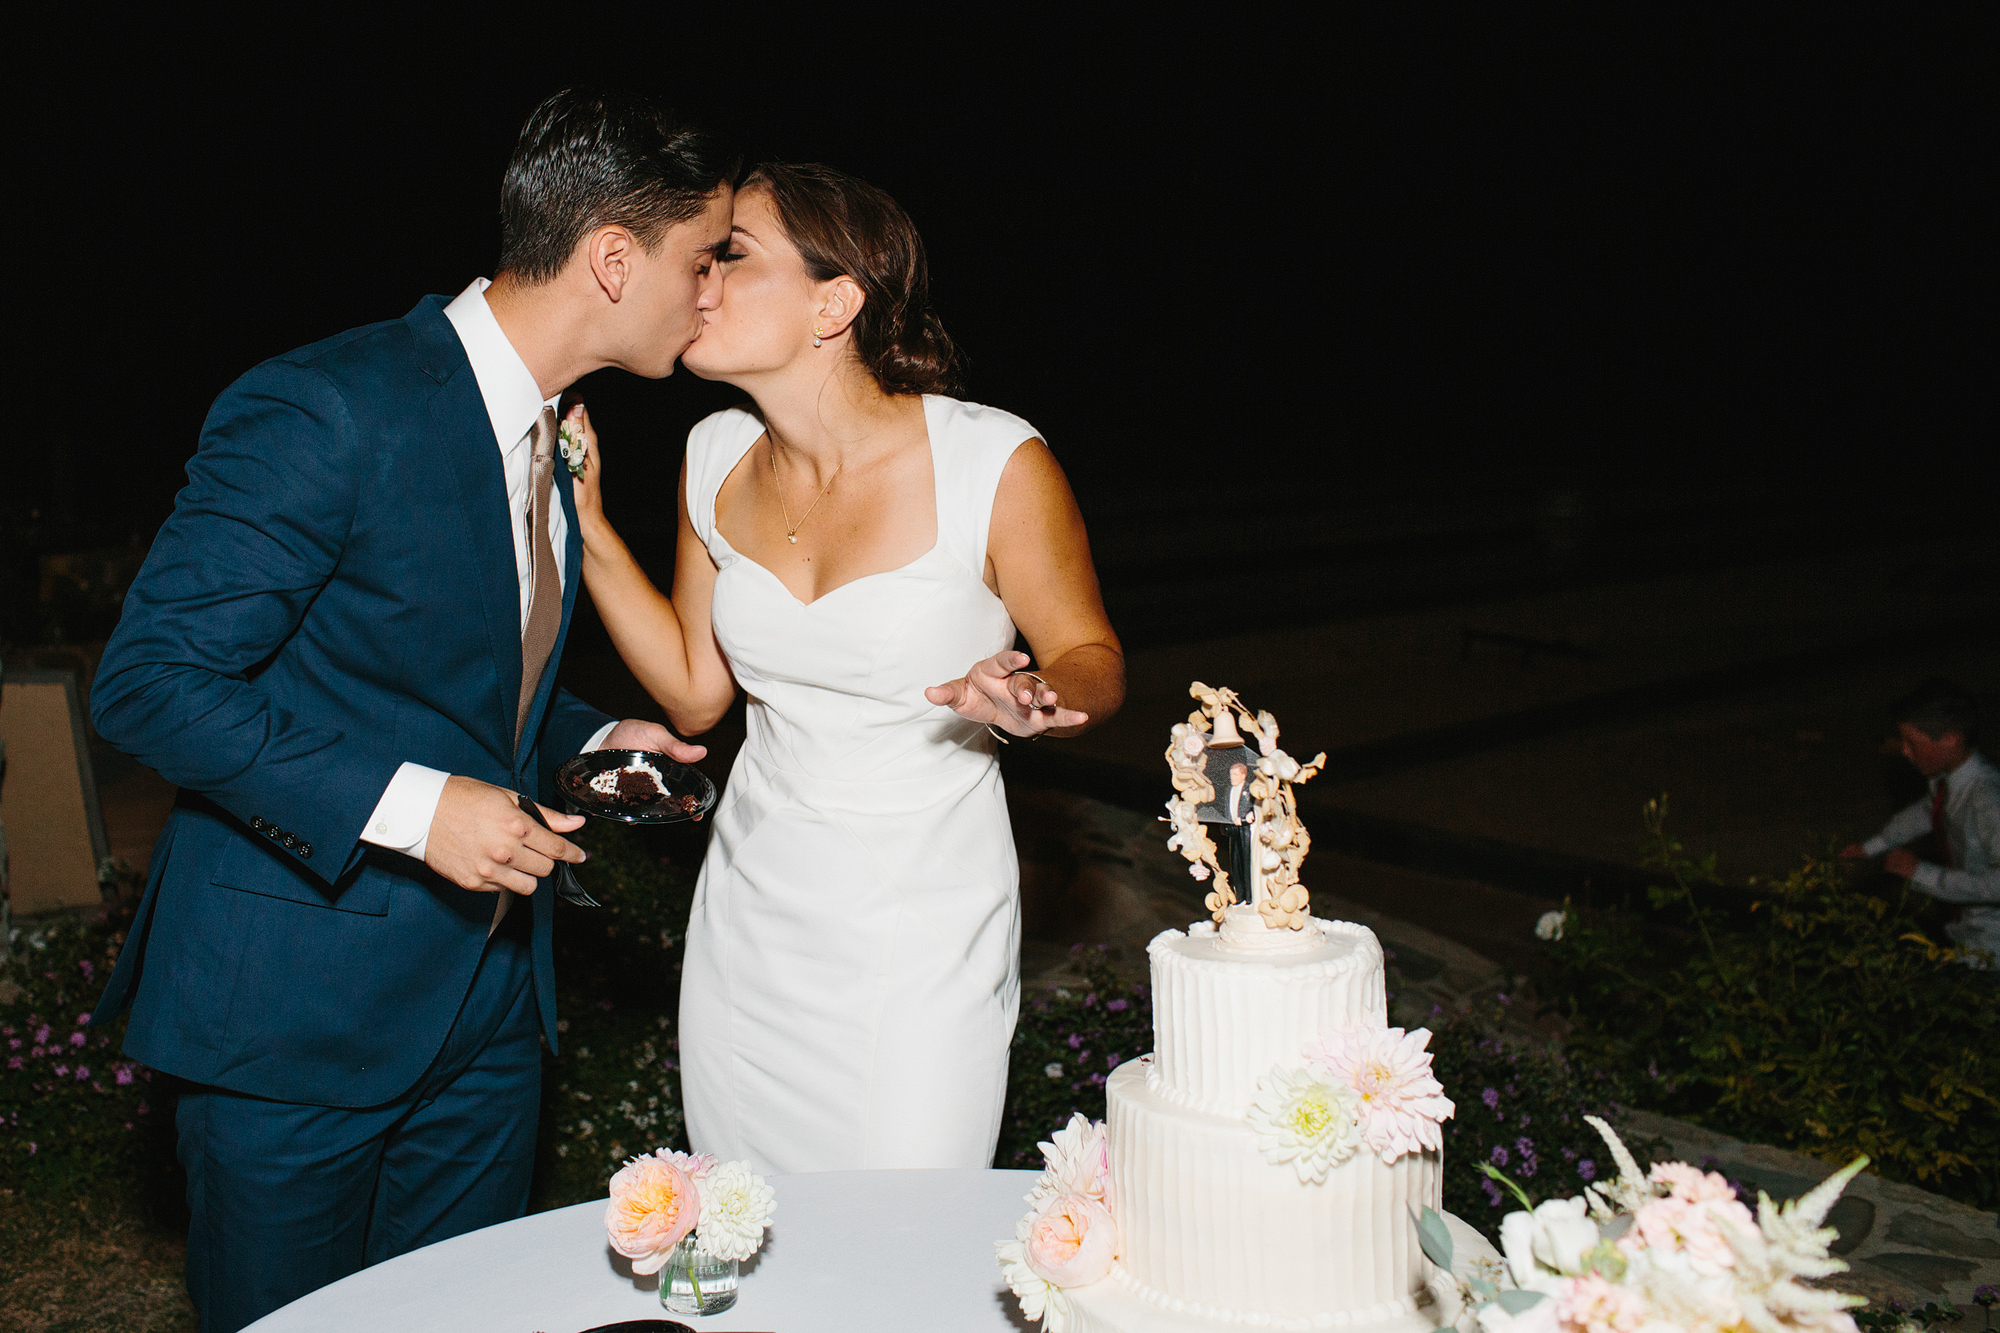 The couple sharing a kiss after cake cutting. 